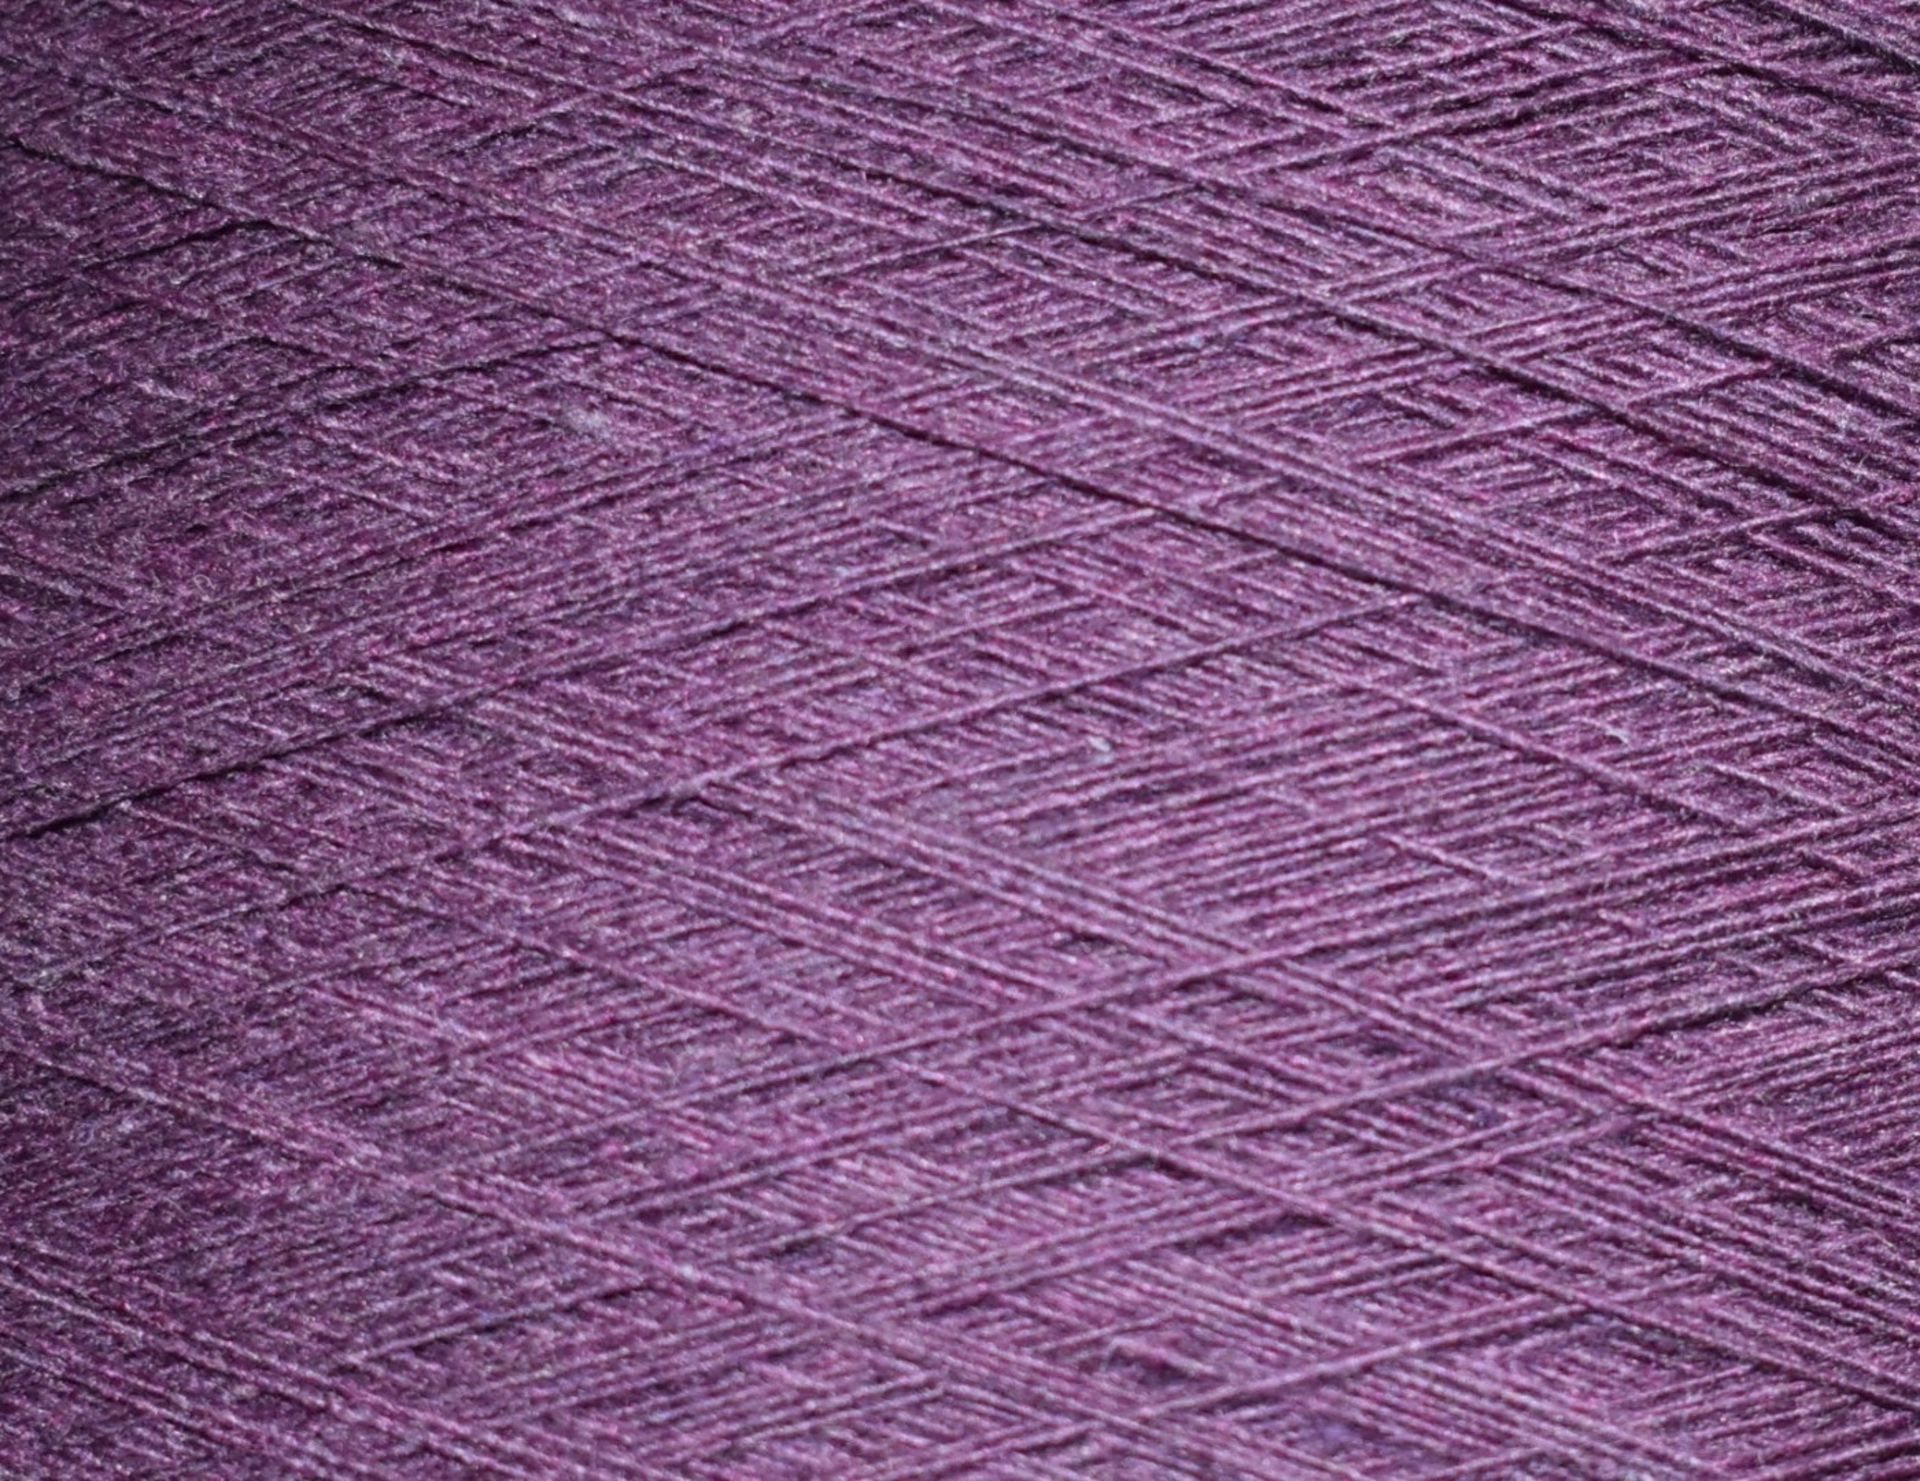 6 x Cones of 1/13 MicroCotton Knitting Yarn - Purple - Approx Weight: 2,300g - New Stock ABL Yarn - Image 6 of 9